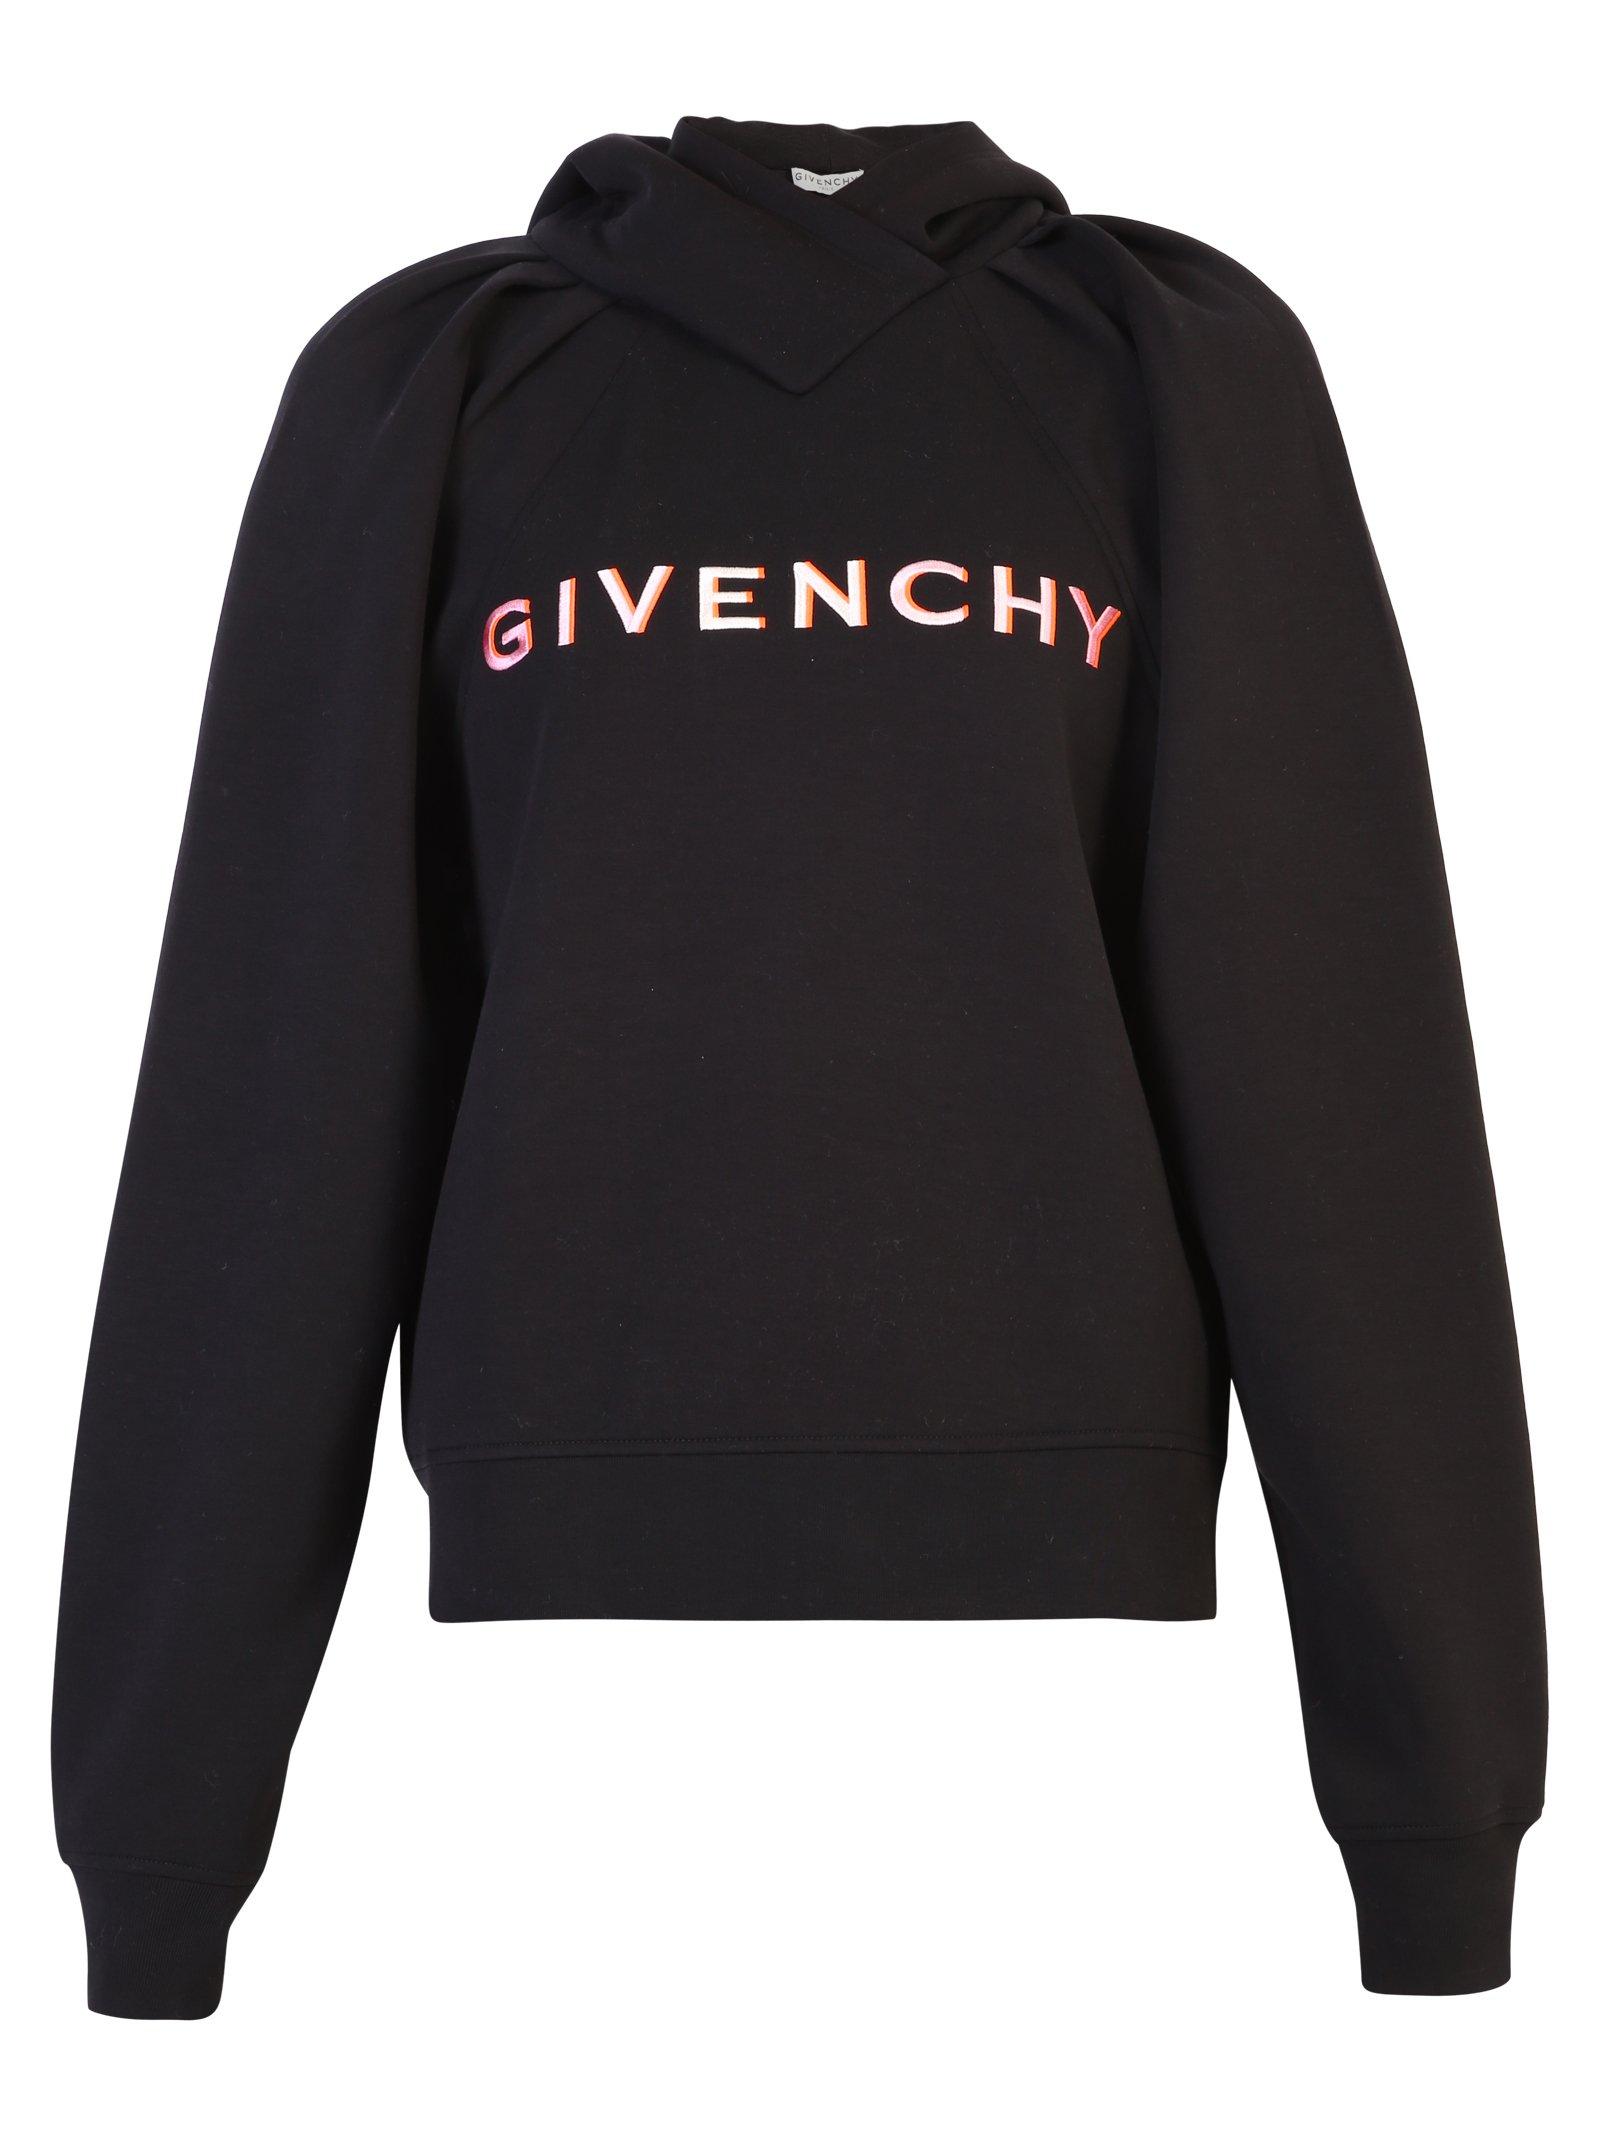 Givenchy Cotton Embroidered Logo Hoodie in Black - Lyst